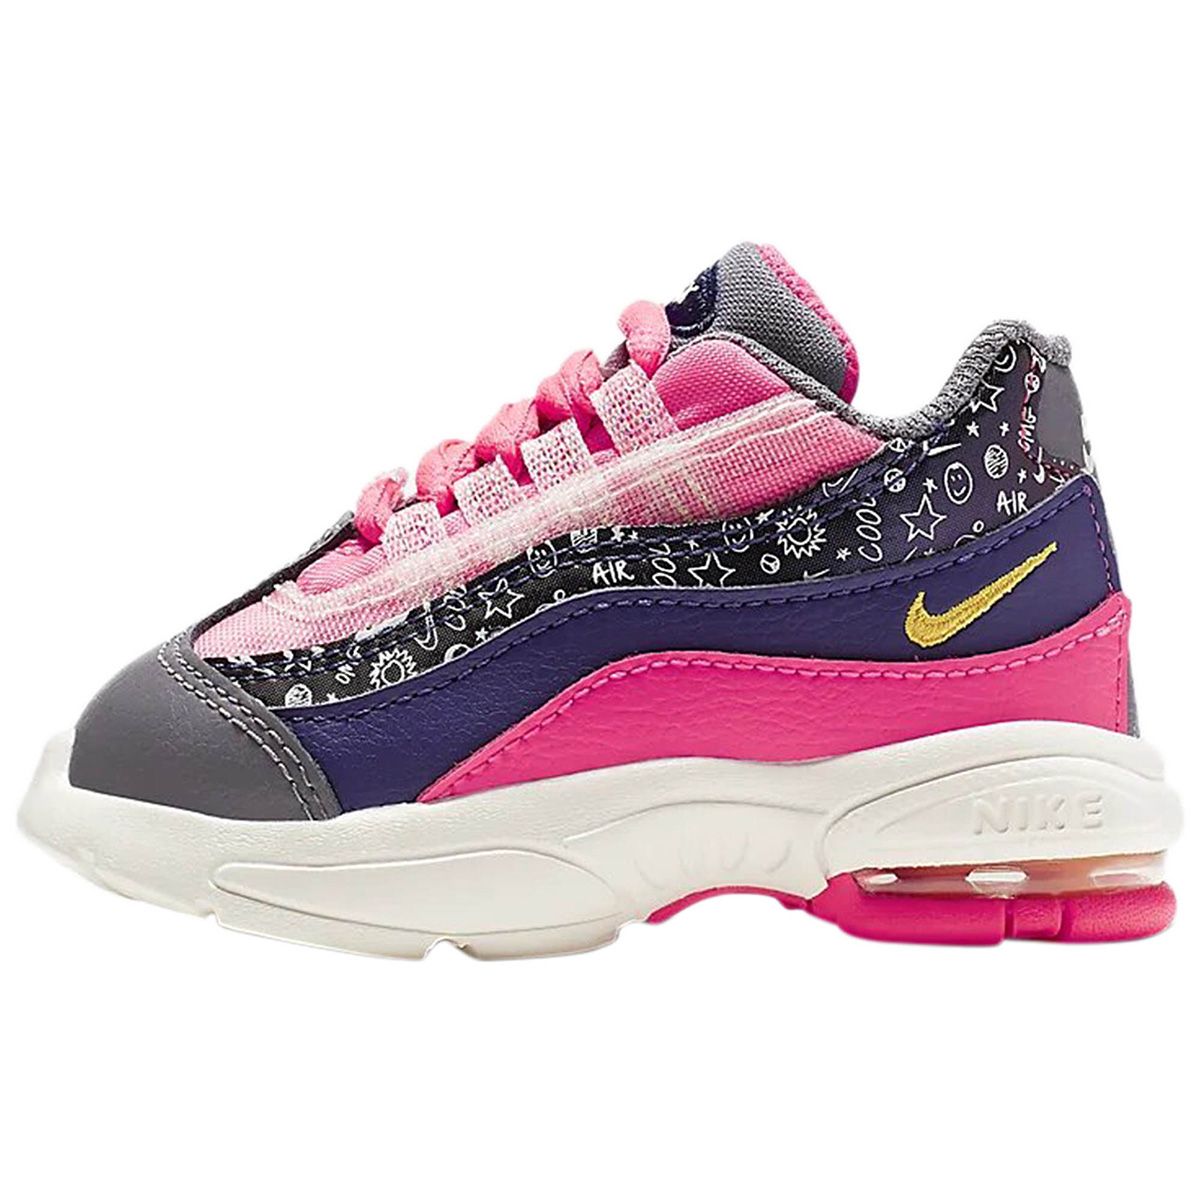 Nike Air Max 95 Toddlers Style : Ci9938-500